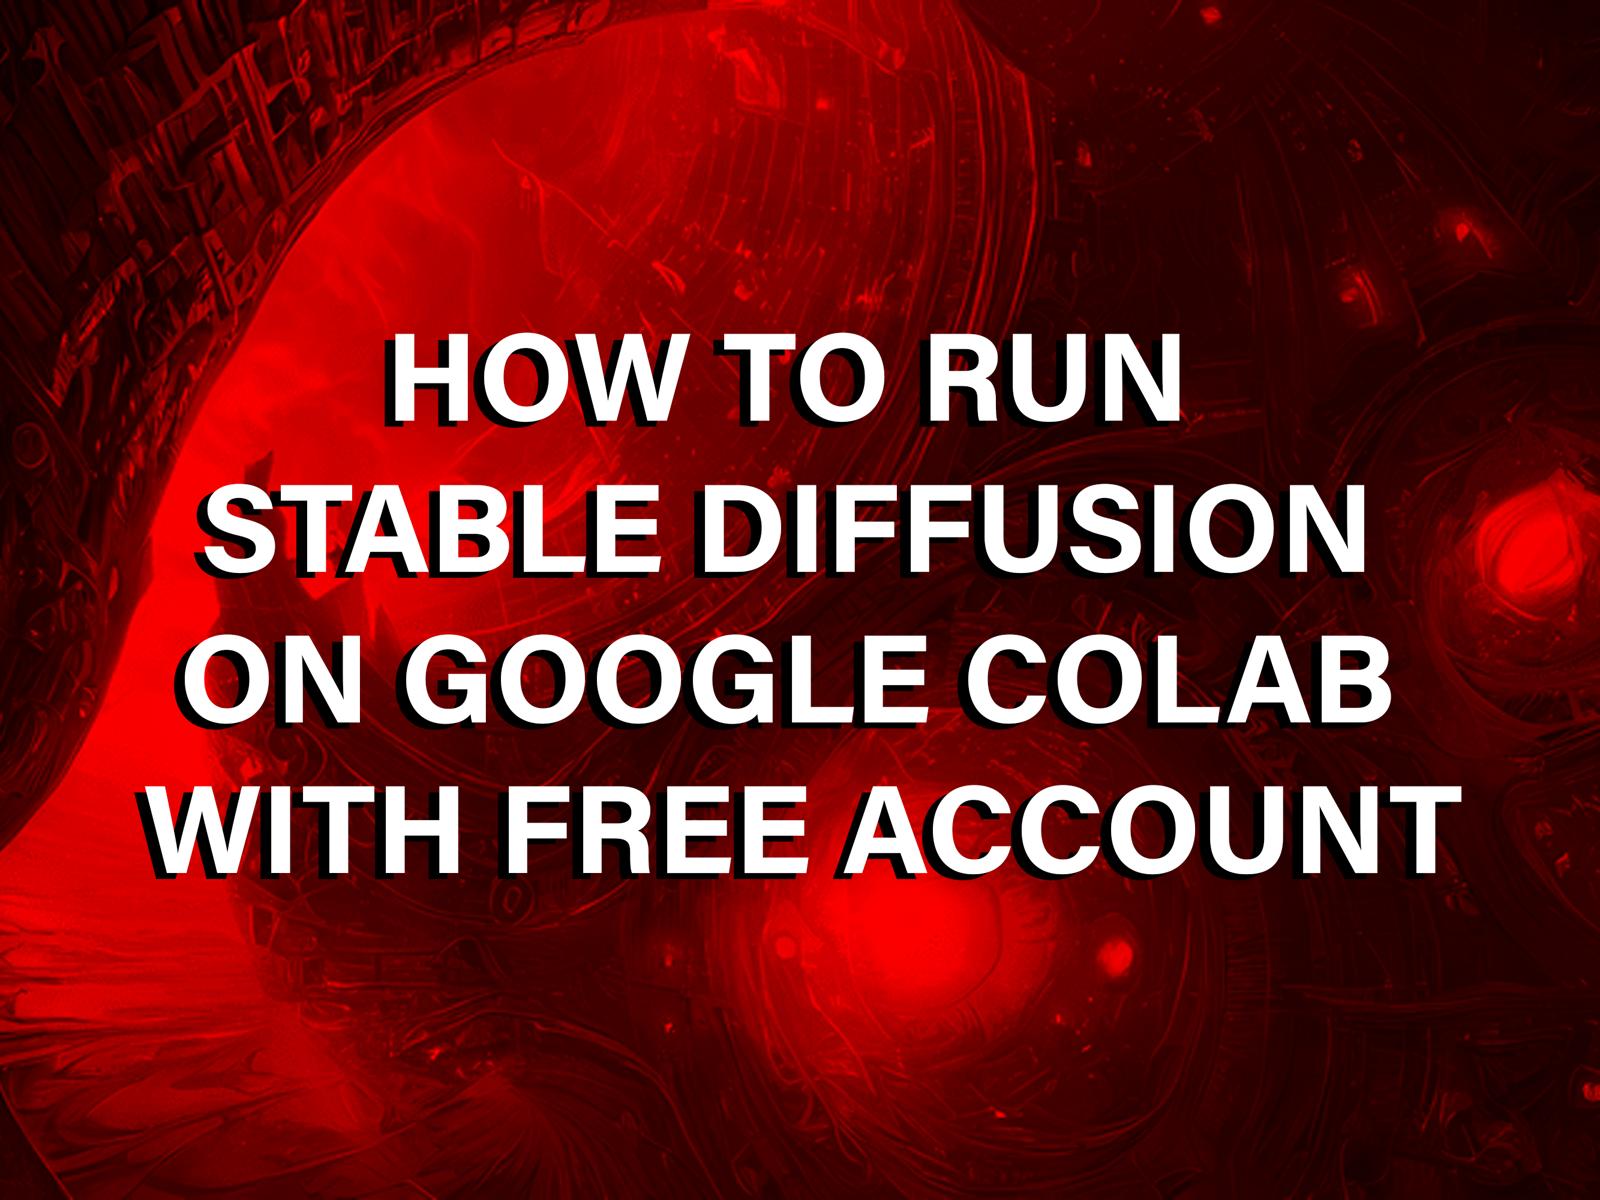 how to run stable diffusion on google colab with free account